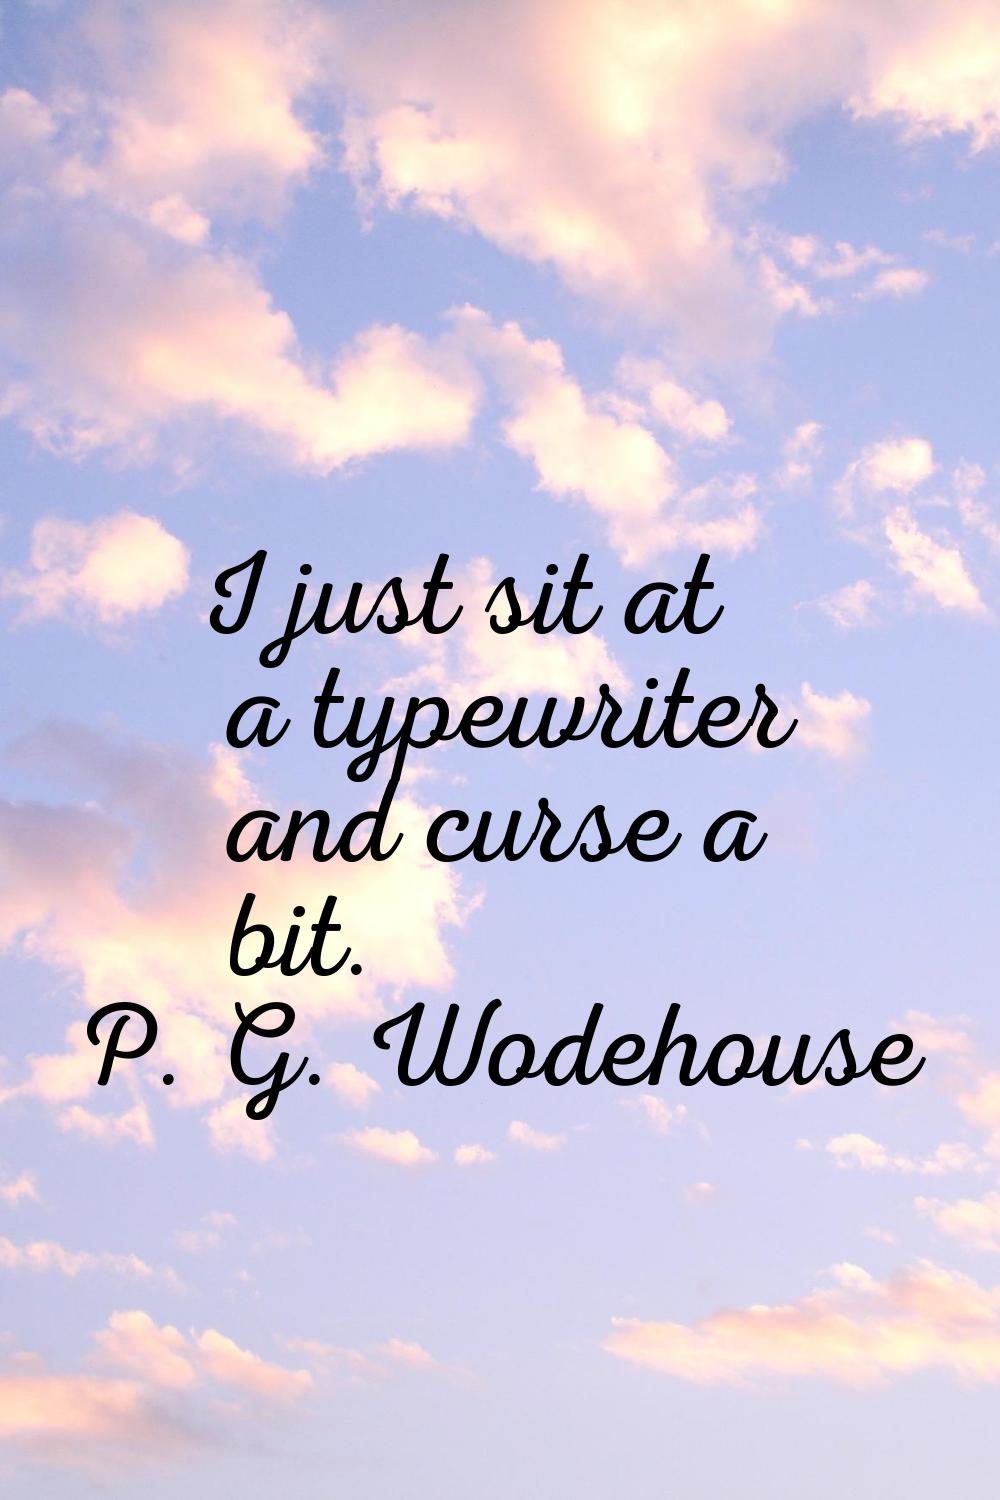 I just sit at a typewriter and curse a bit.